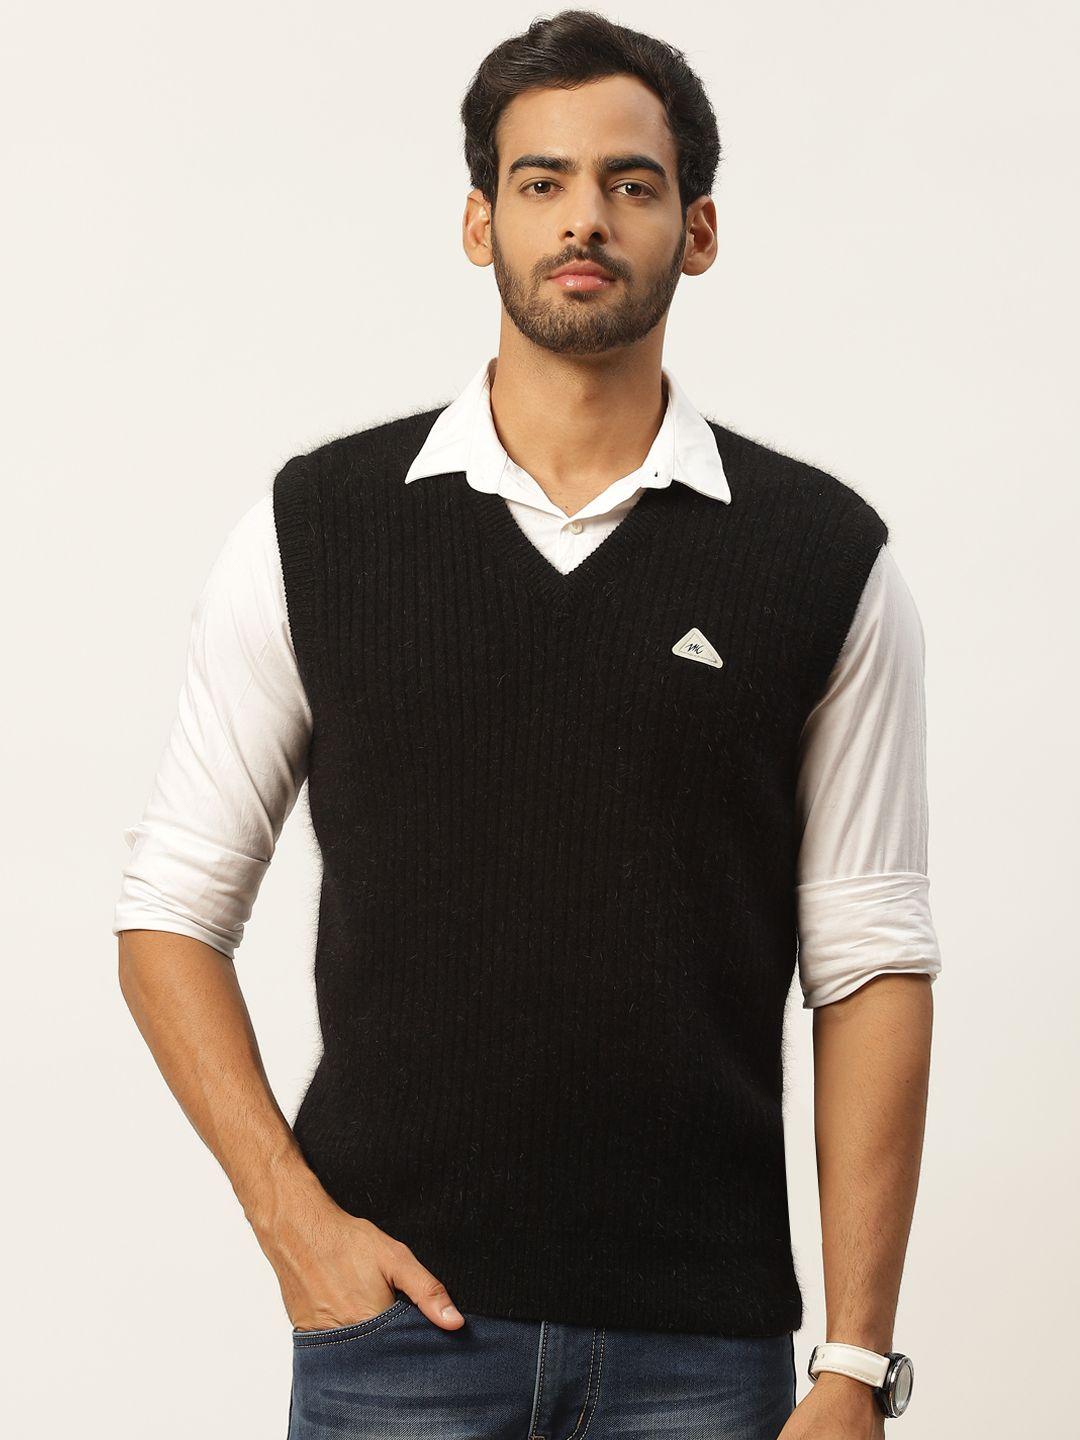 monte carlo men black angora wool ribbed sweater vest with applique detail